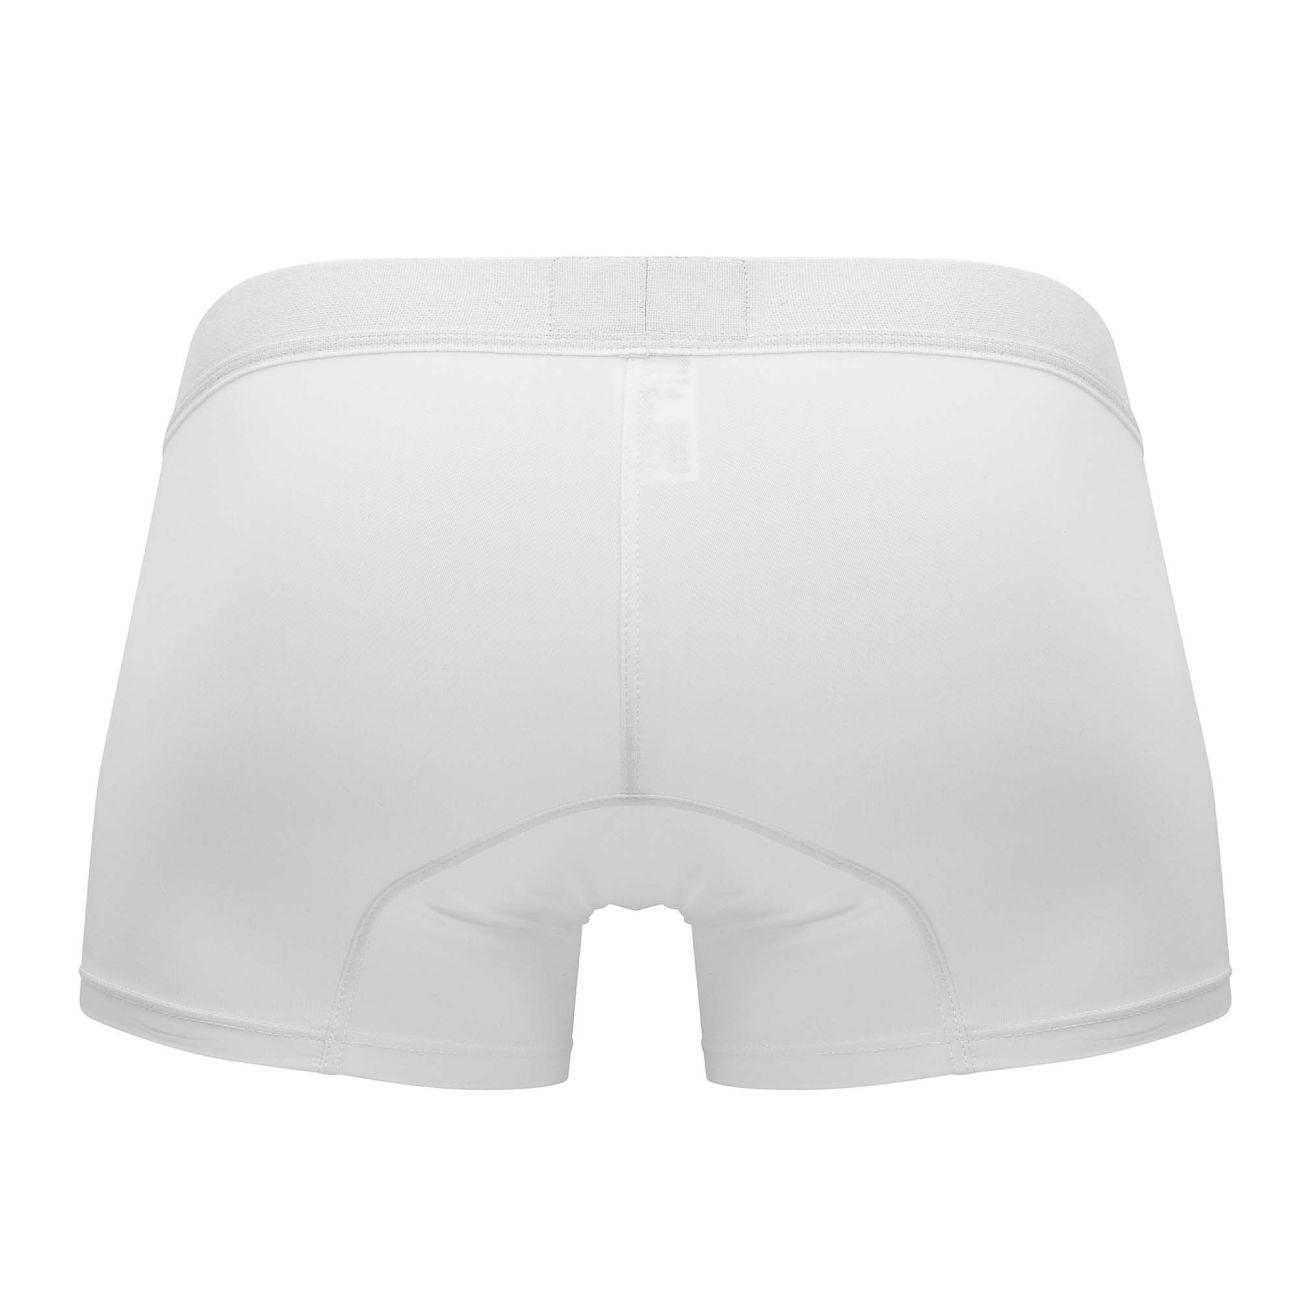 image of product,Match Boxer Briefs - SEXYEONE